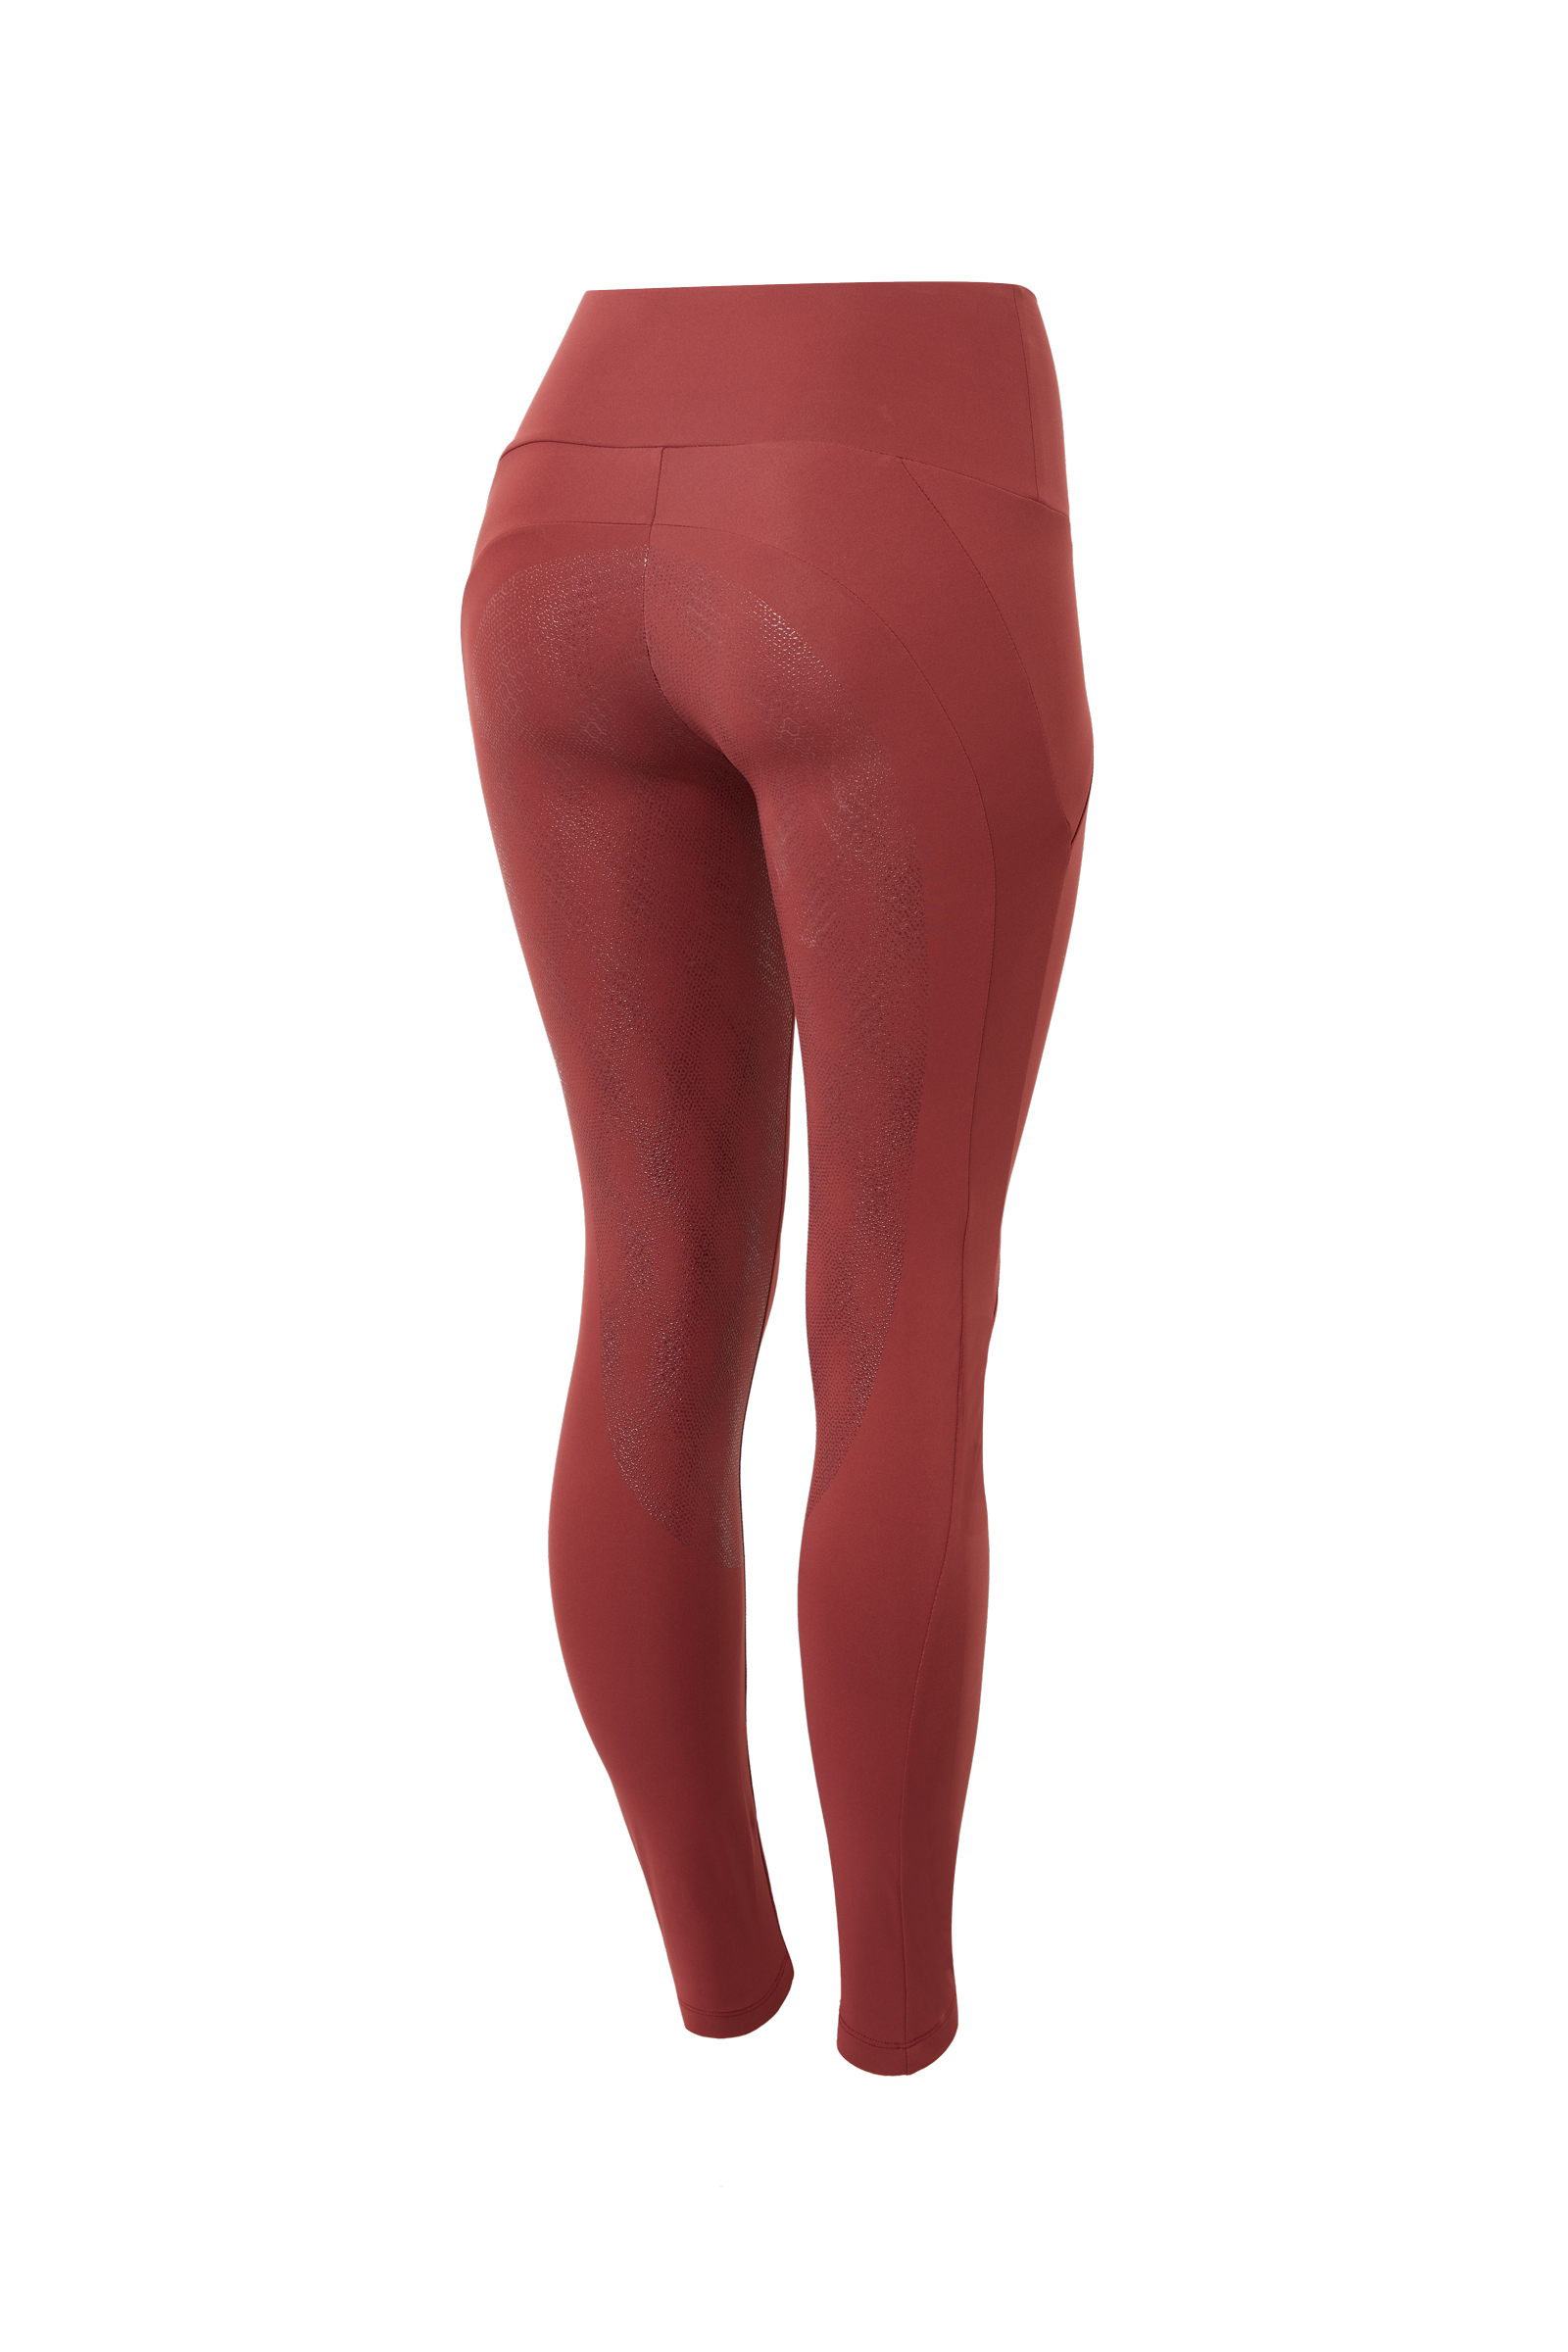 Horze Raquel Women's Full Seat Riding Tights with Phone Pockets